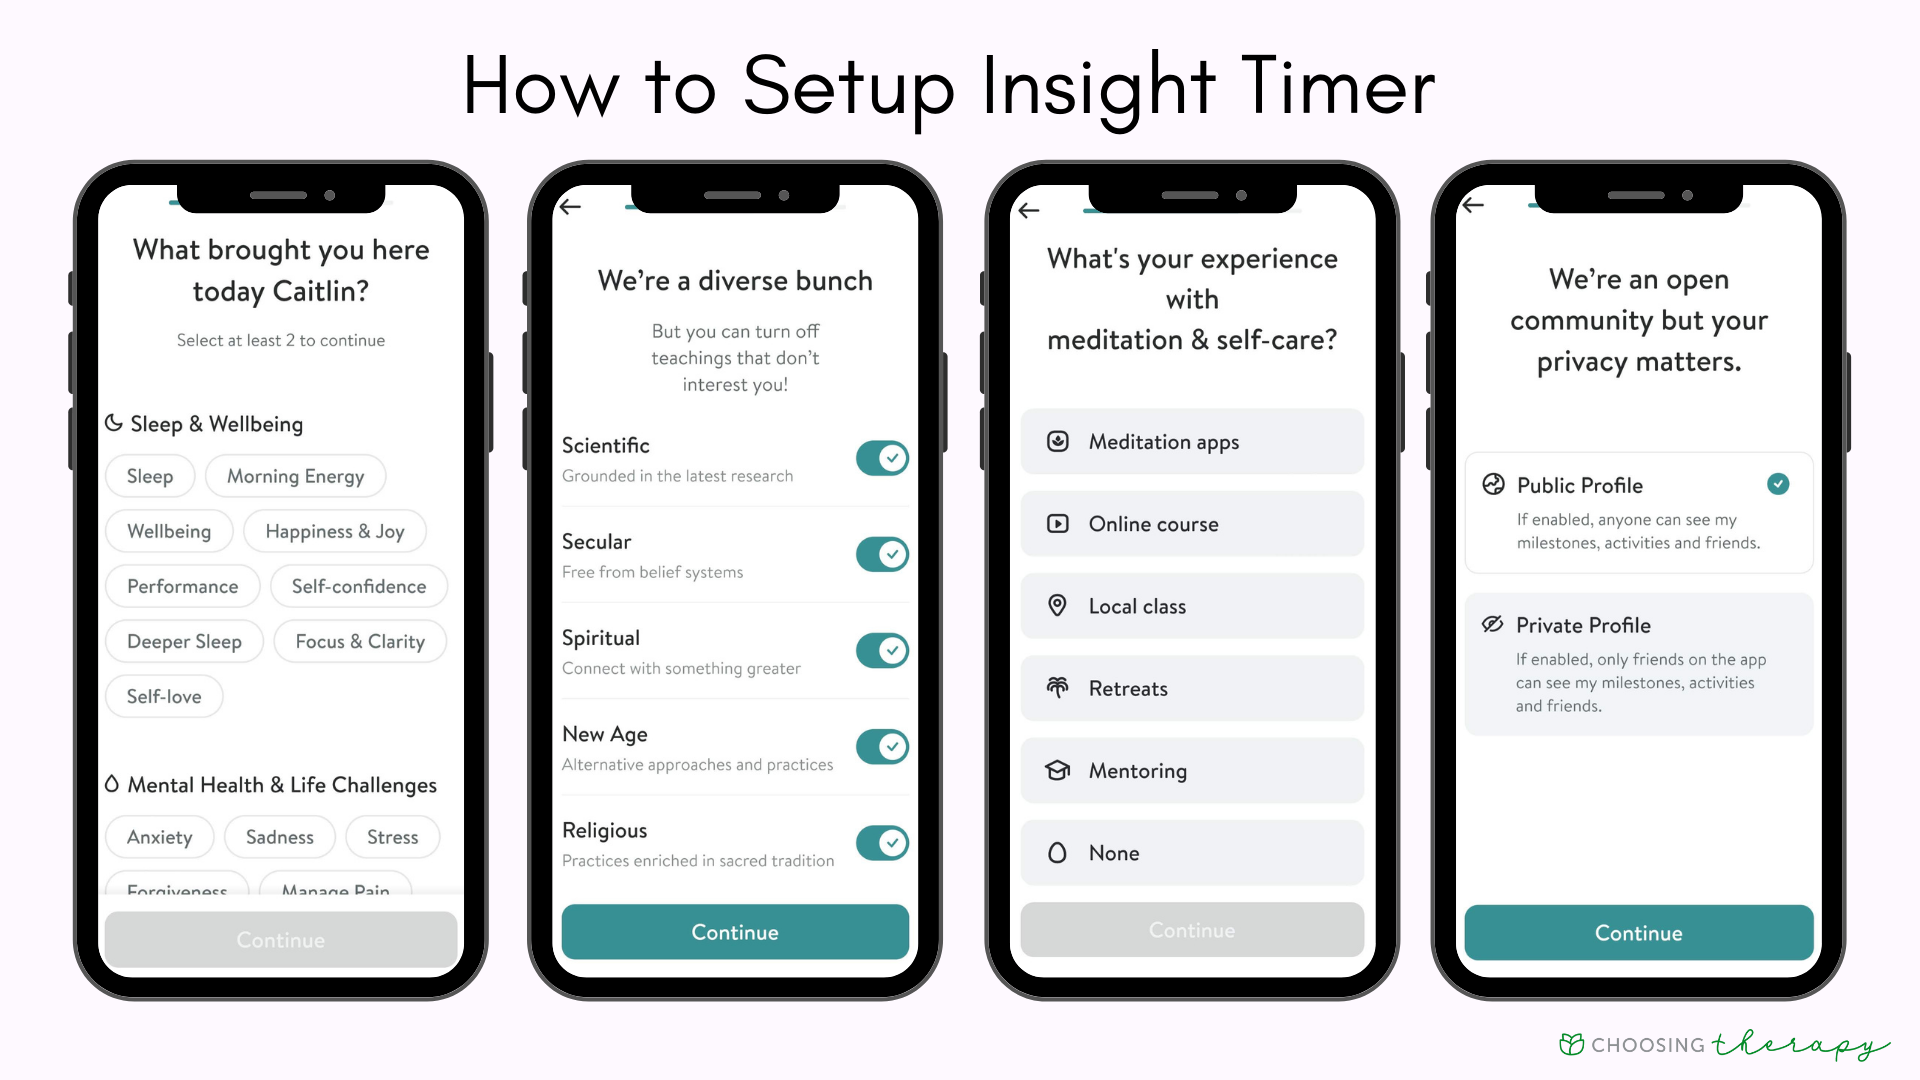 Insight Timer App Review 2022 - Image of How to Setup the Insight Timer